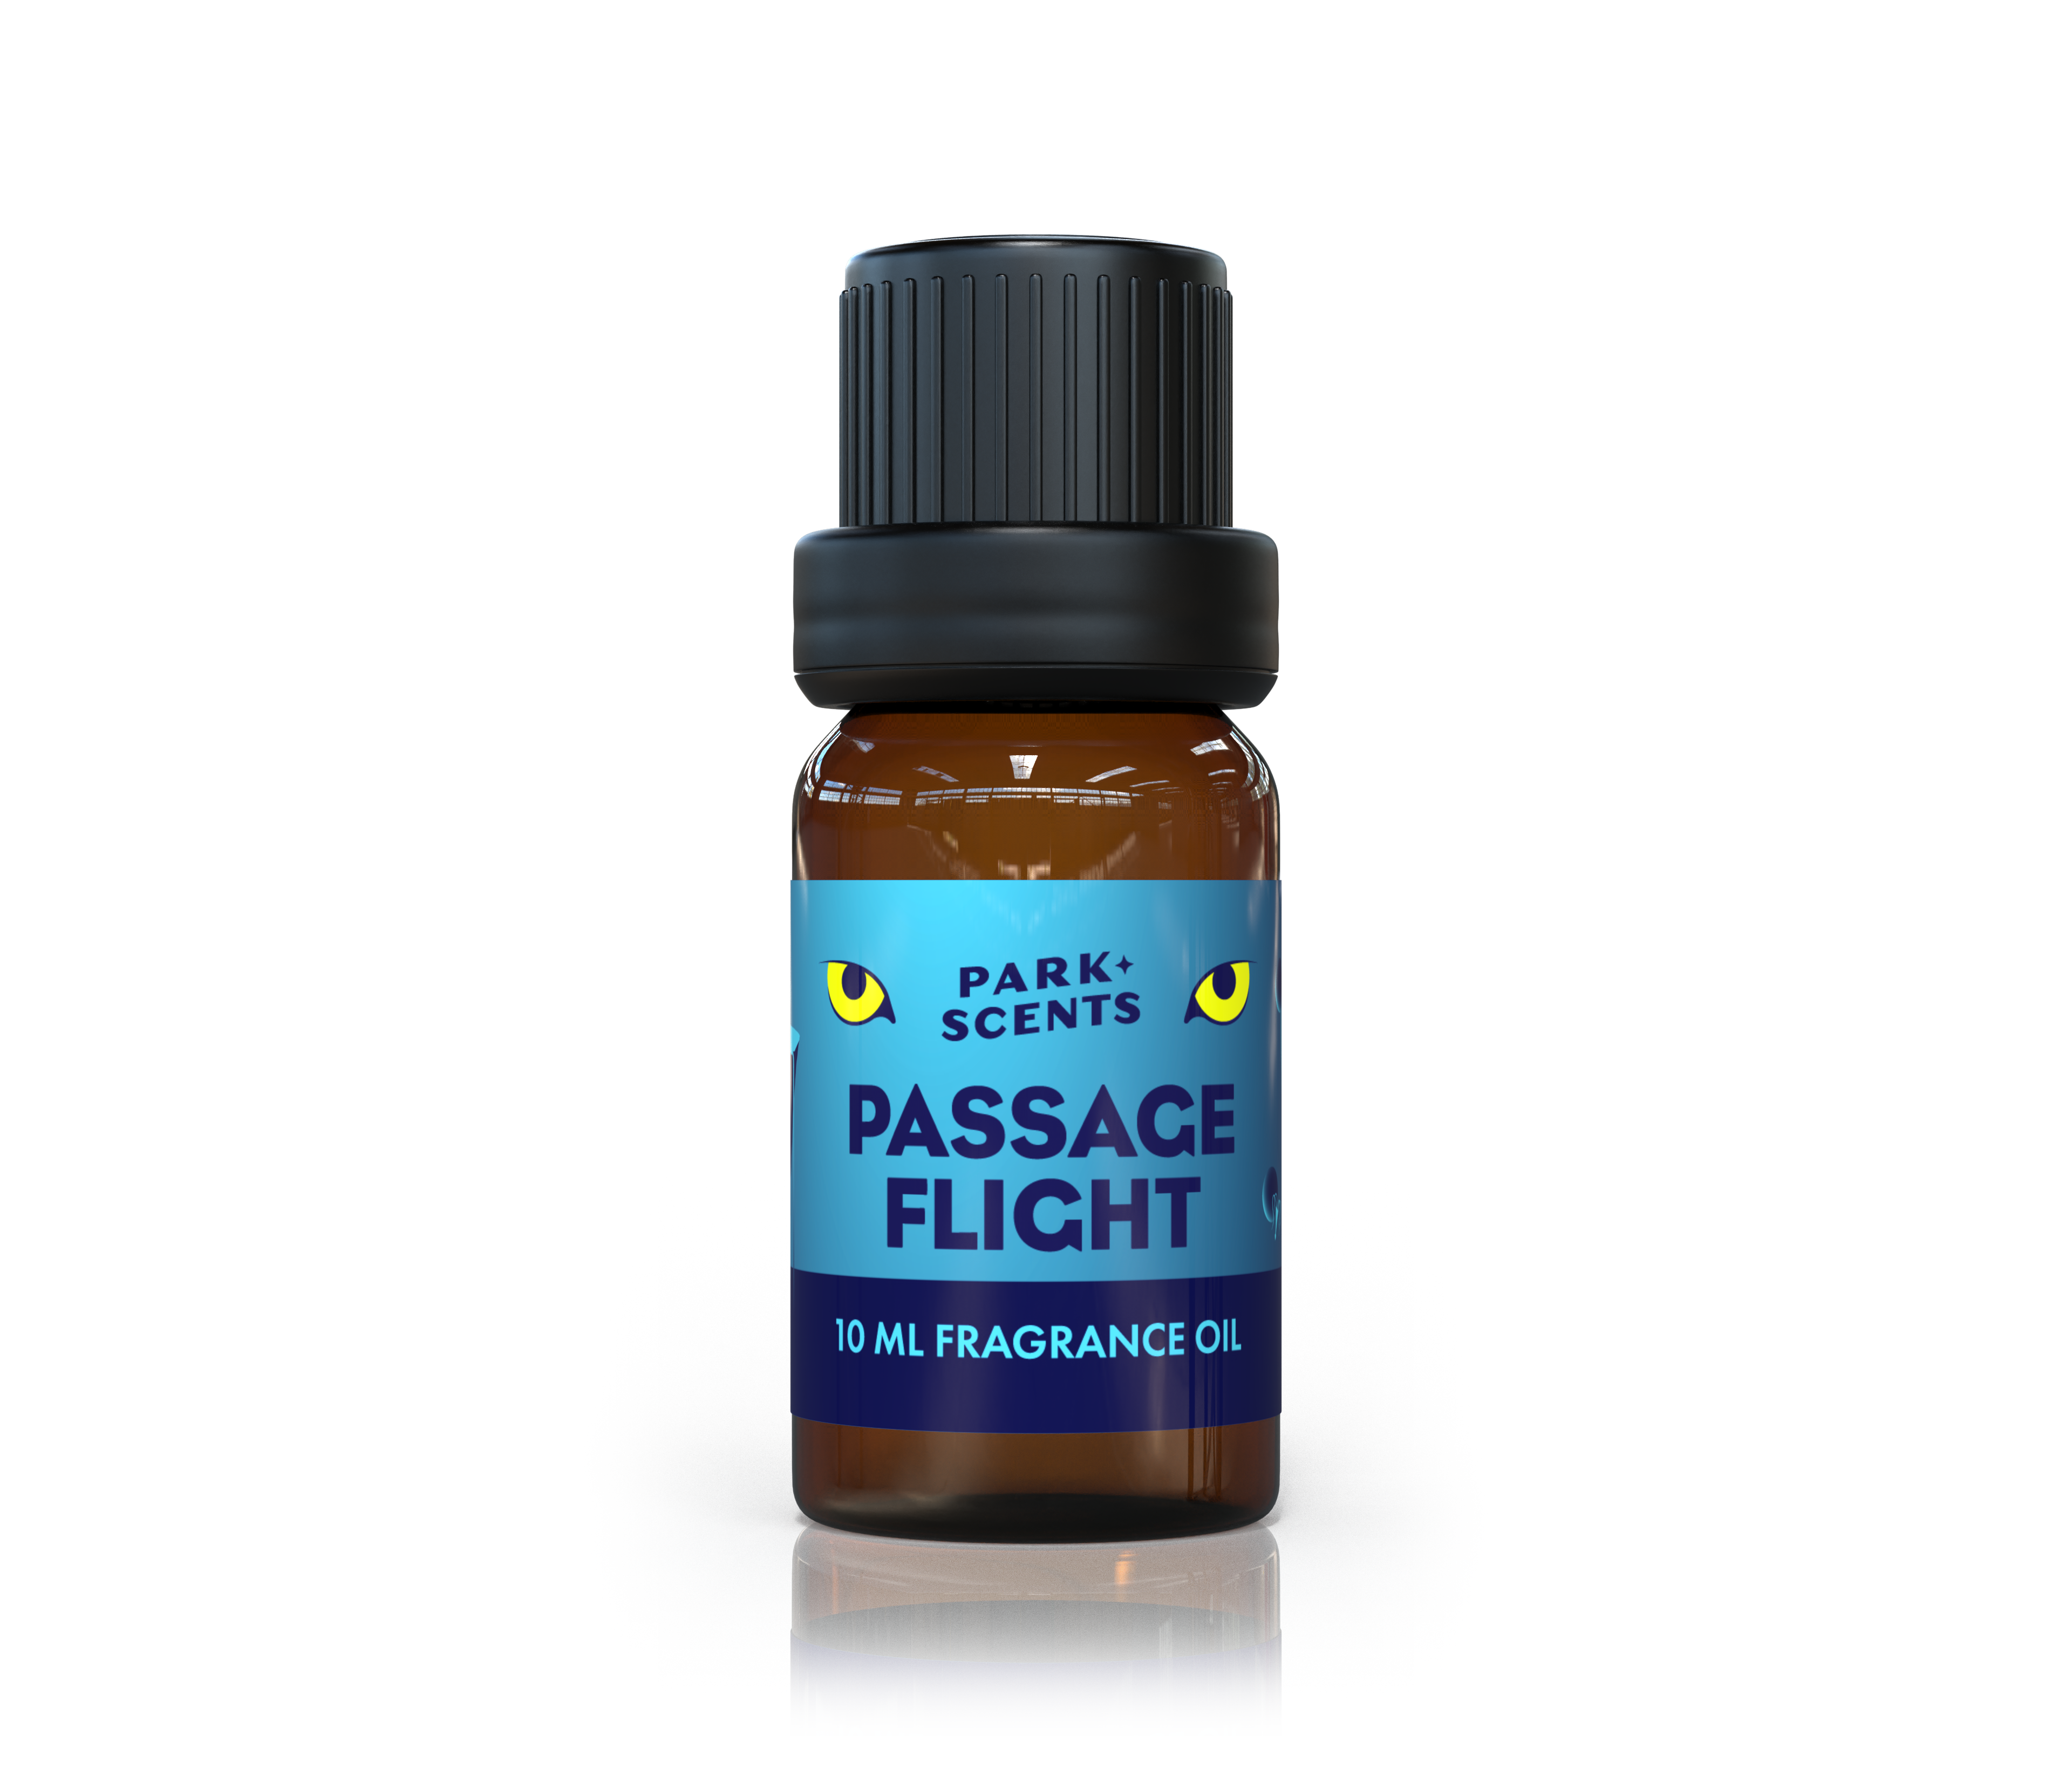 Park Scents Passage Flight Candle - Super Accurate Smell of The Ocean Scene in Flight of Passage Ride - Soy Blend Vegan and Cruelty Free - Handmade